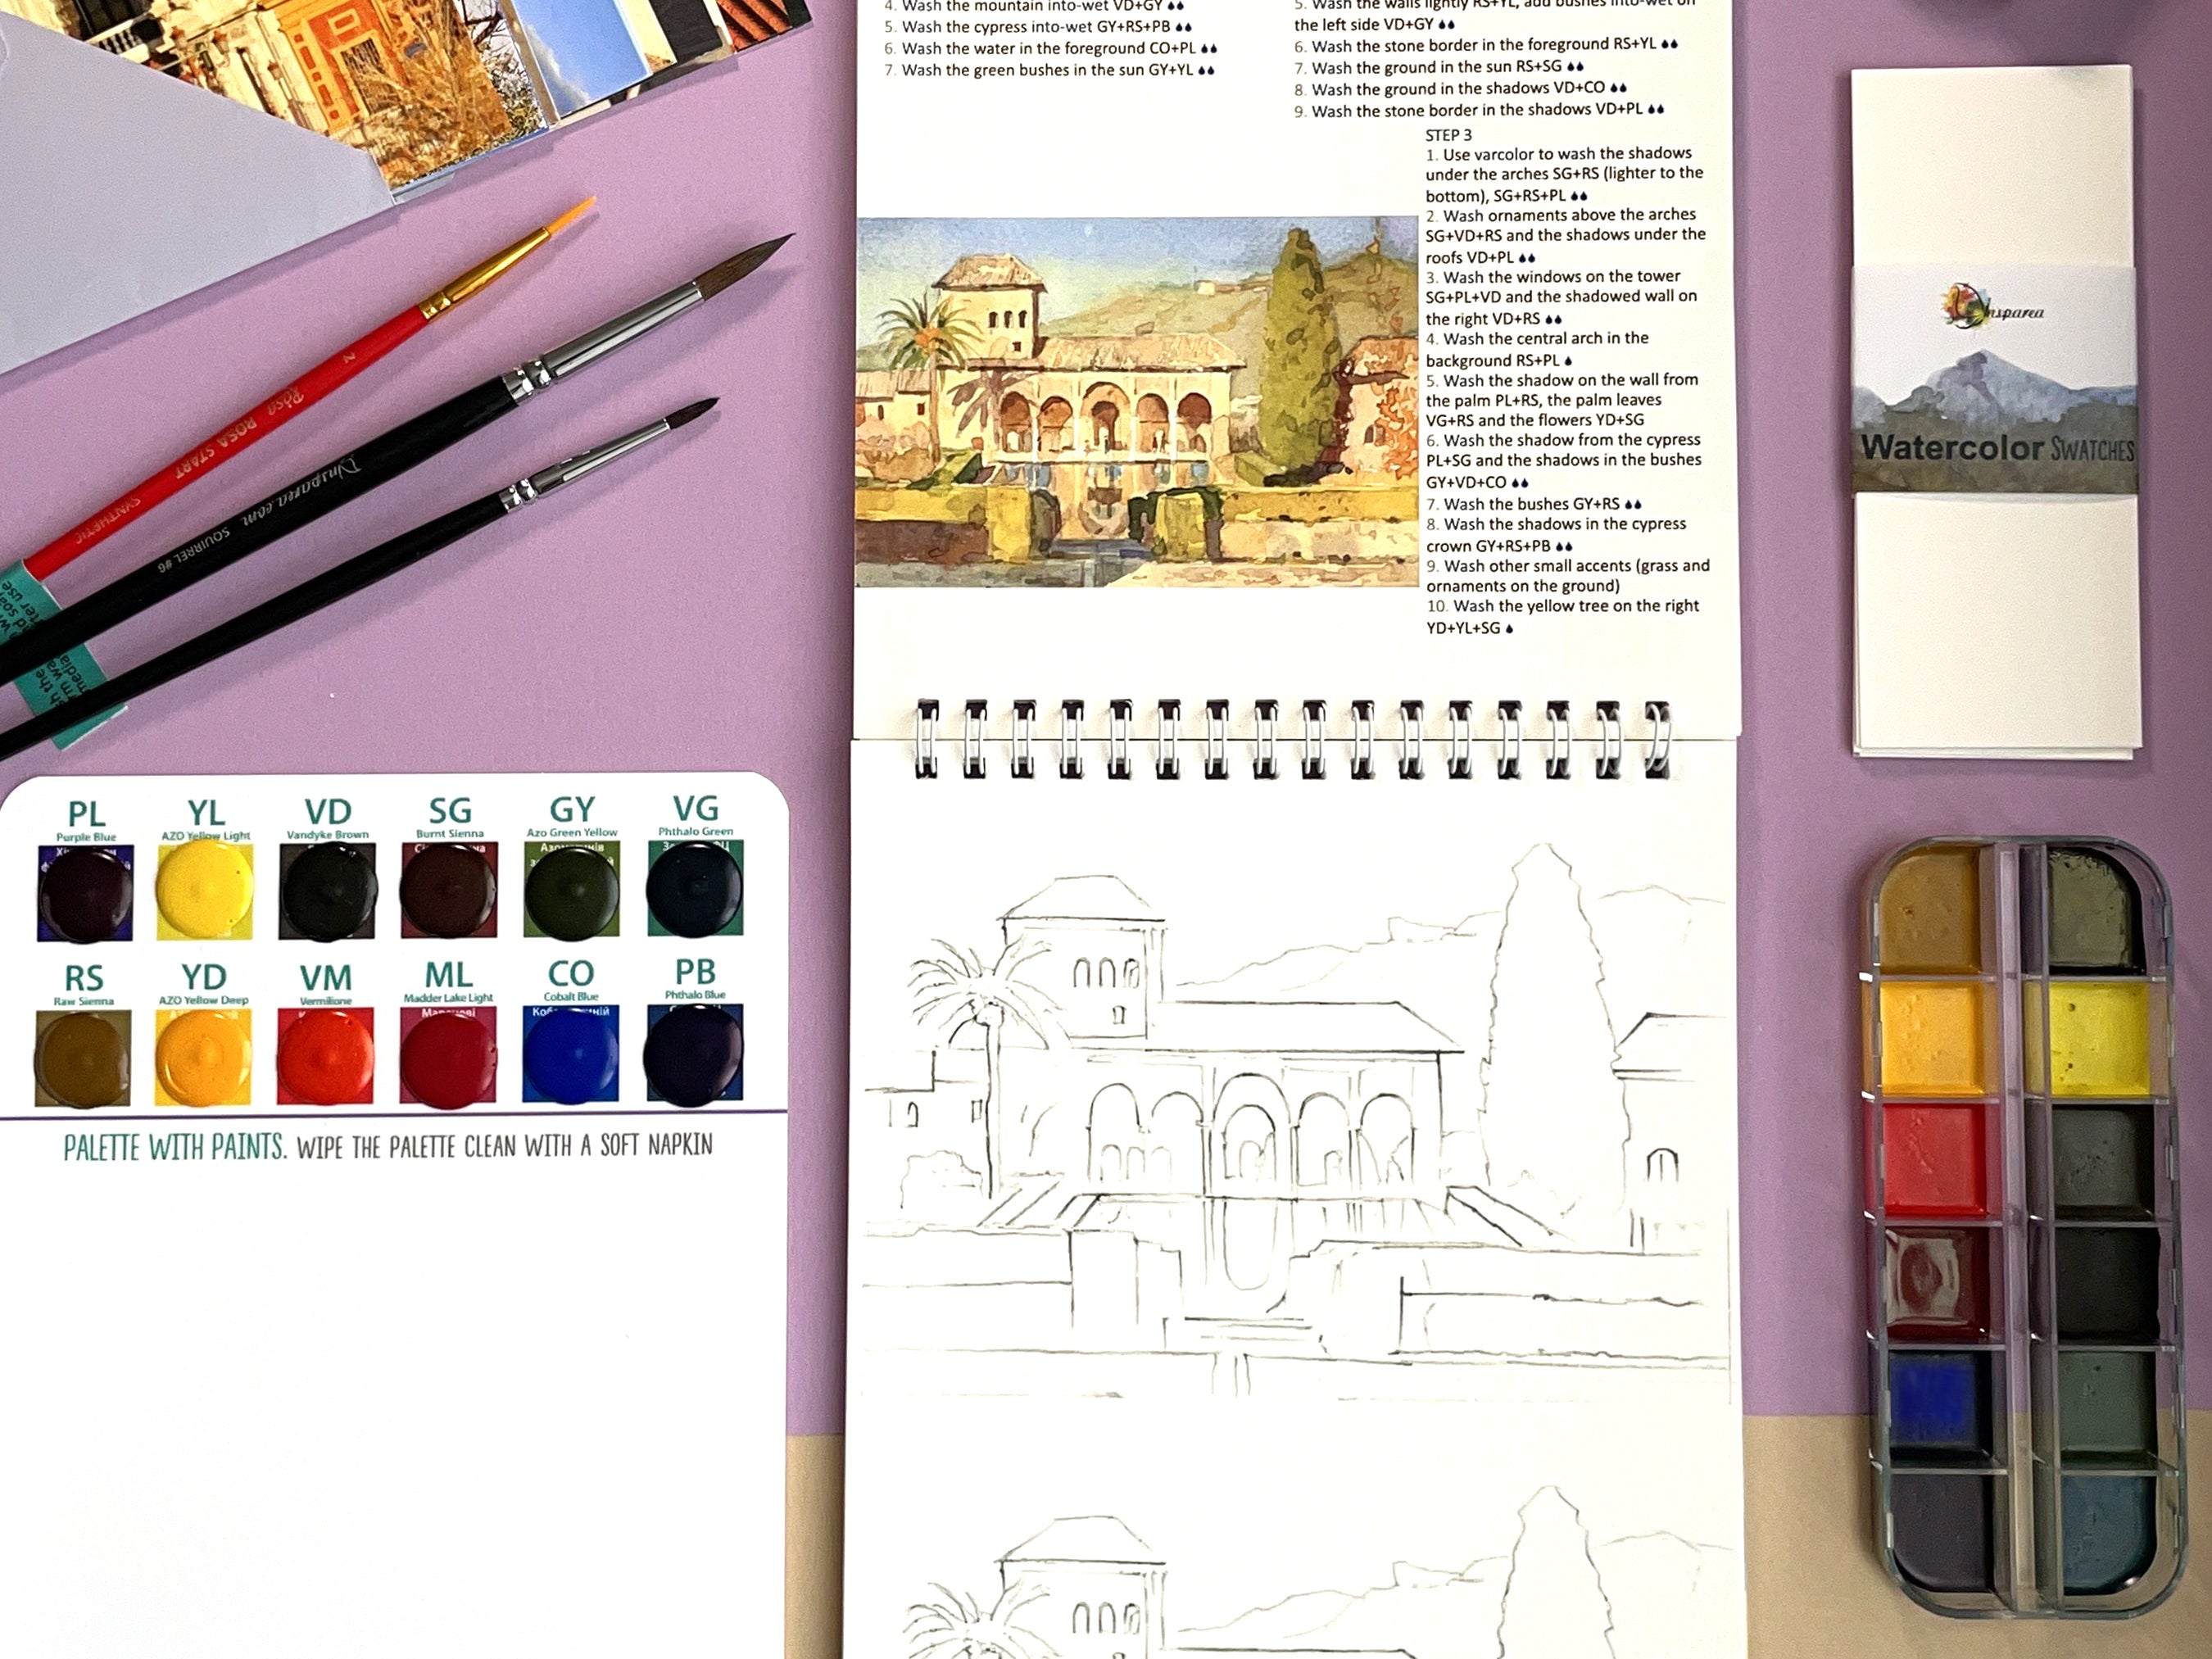 Insparea Watercolor Set Watercolour Trip to Italy, Painting Set for Adults, Paint Kit with Coloring Tutorial Workbook, Art Gift Beginner Sketchbook Wi